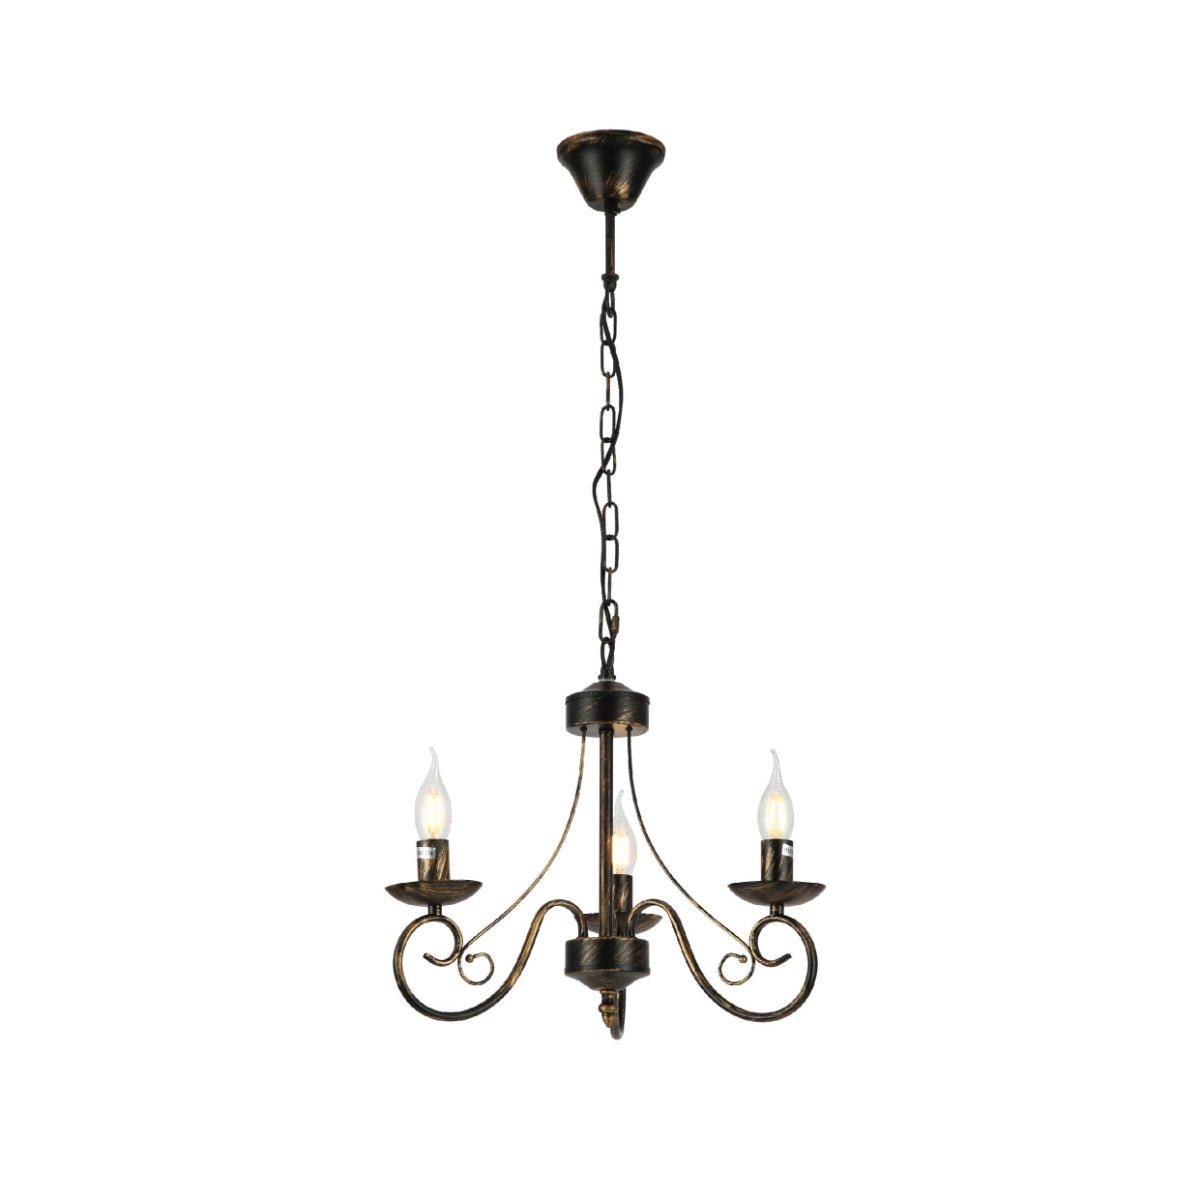 Main image of Candle Vintage Gold Patinated Black French Chandelier Ceiling Light 3xE14 | TEKLED 152-17614